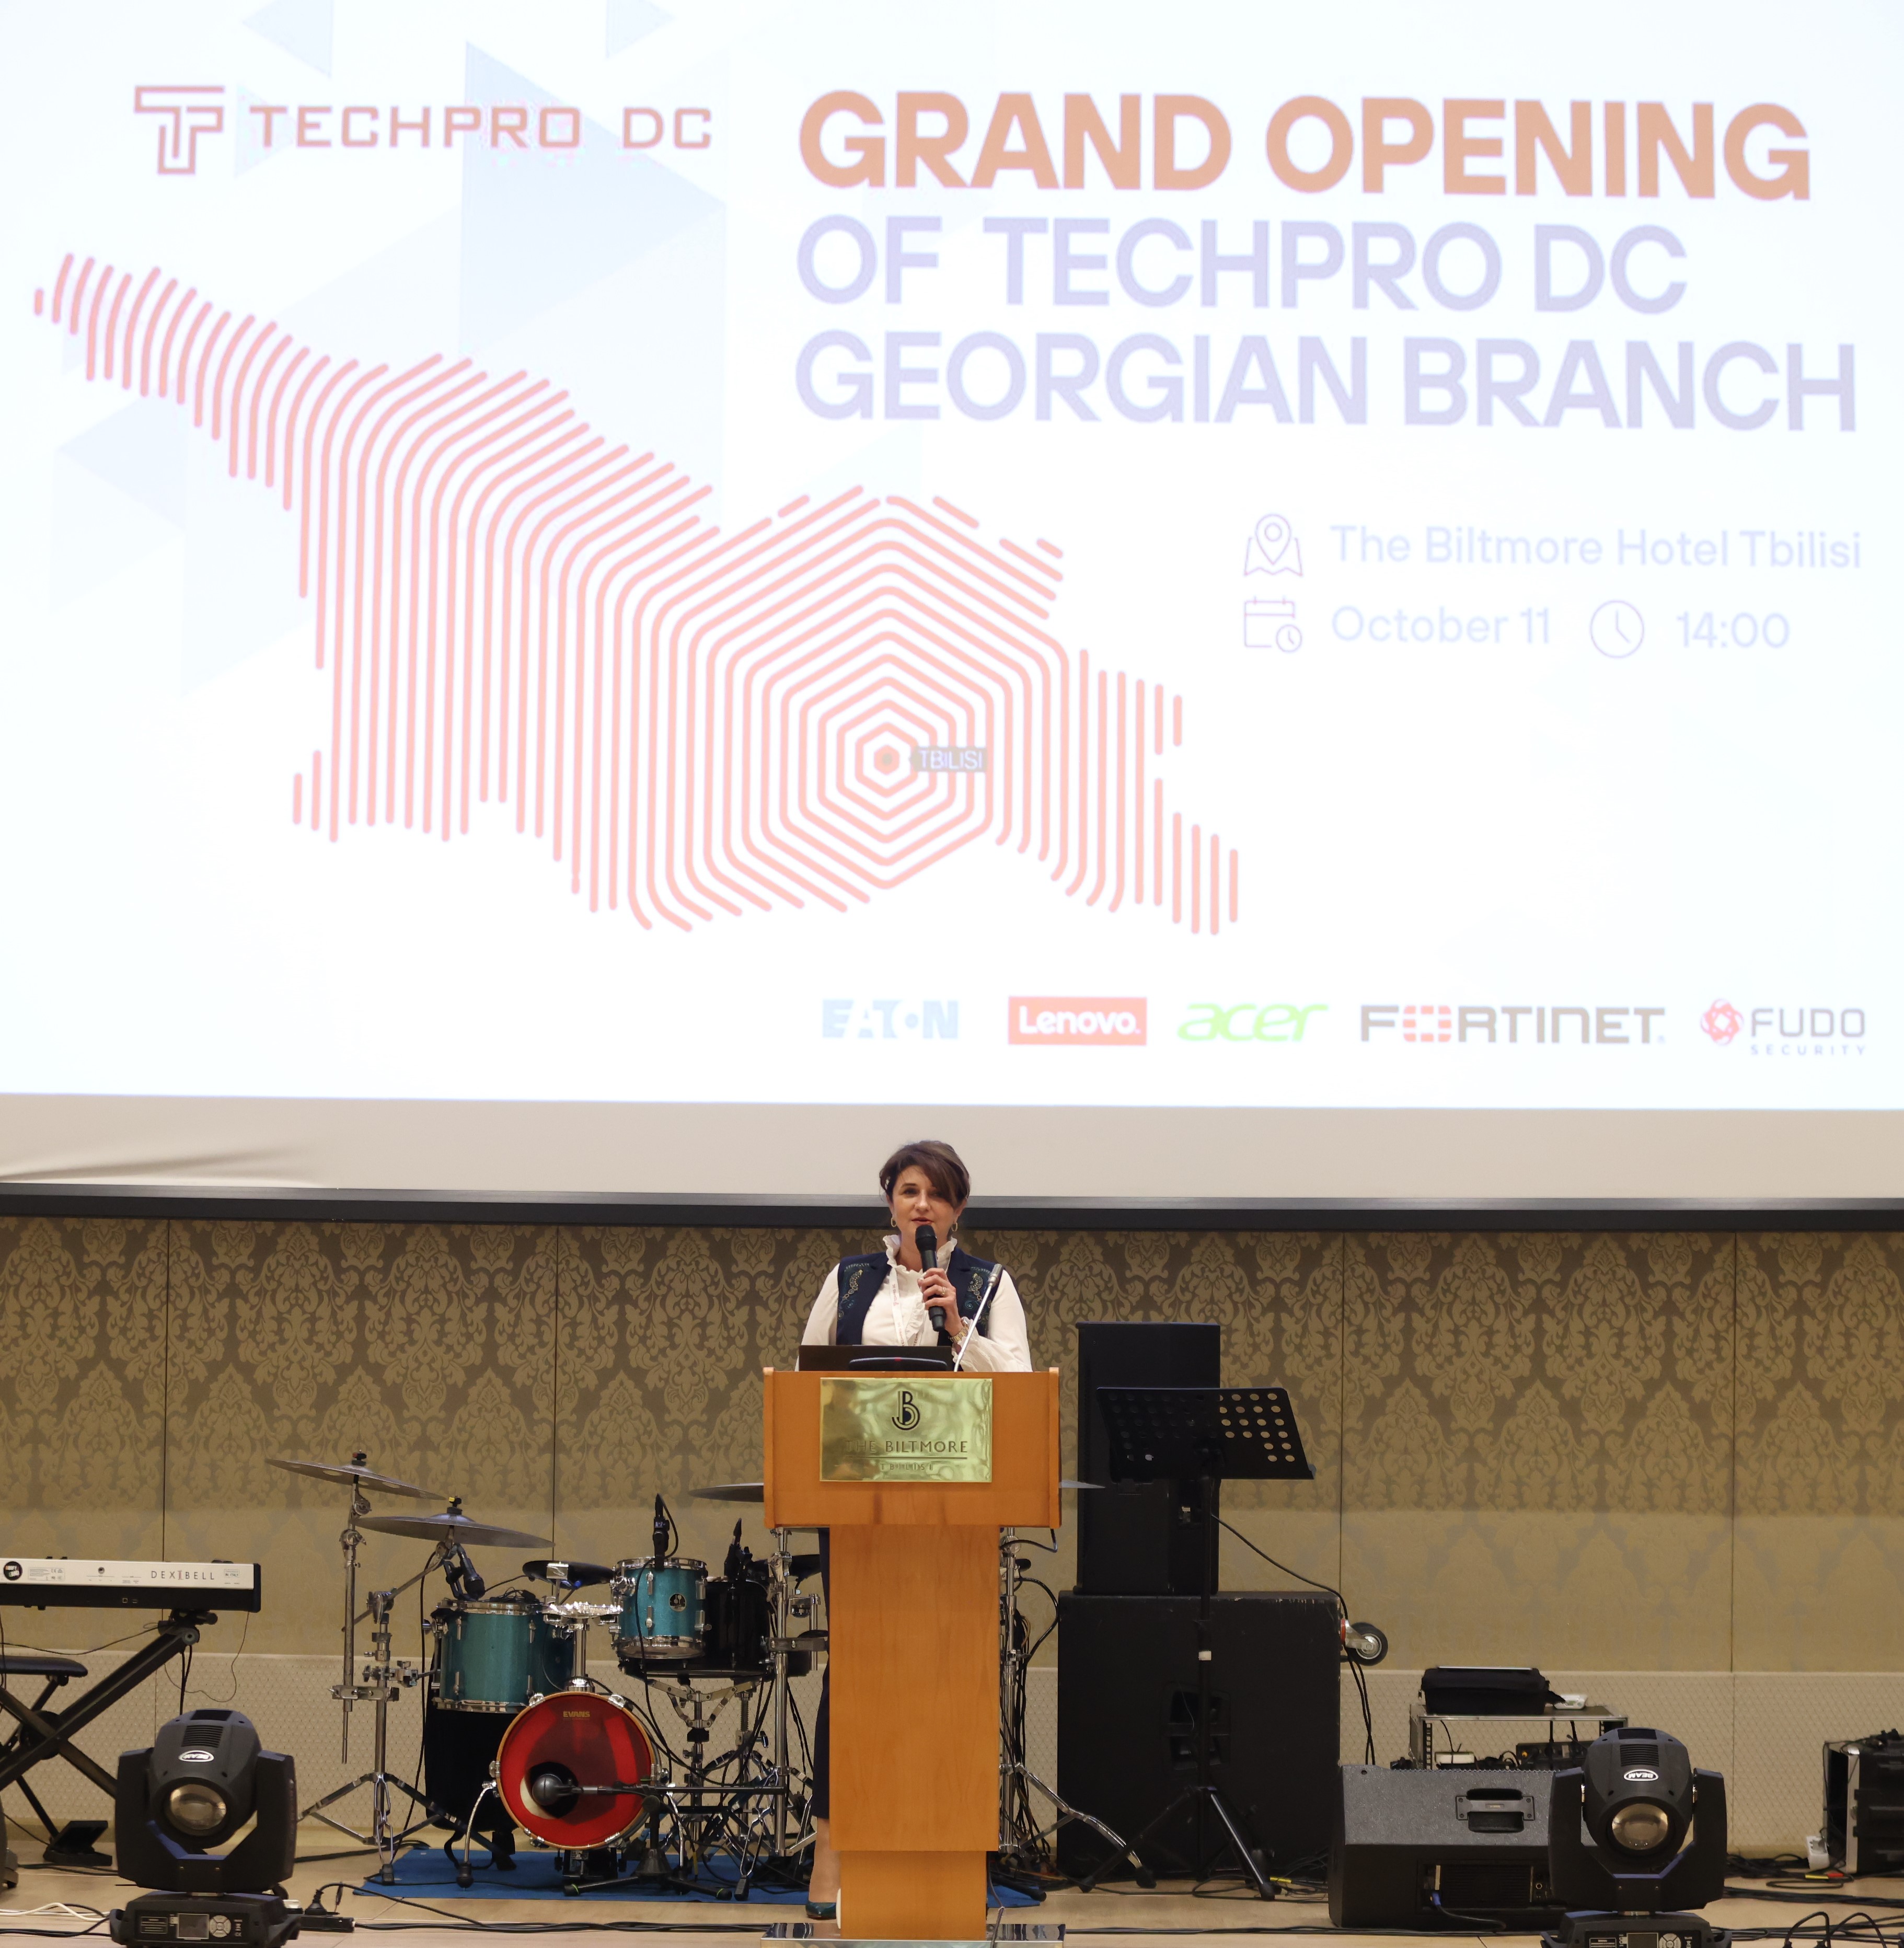 The event “Grand opening of Techpro DC Georgian branch” was held by #TechproDC at the The Biltmore Hotel Tbilisi.